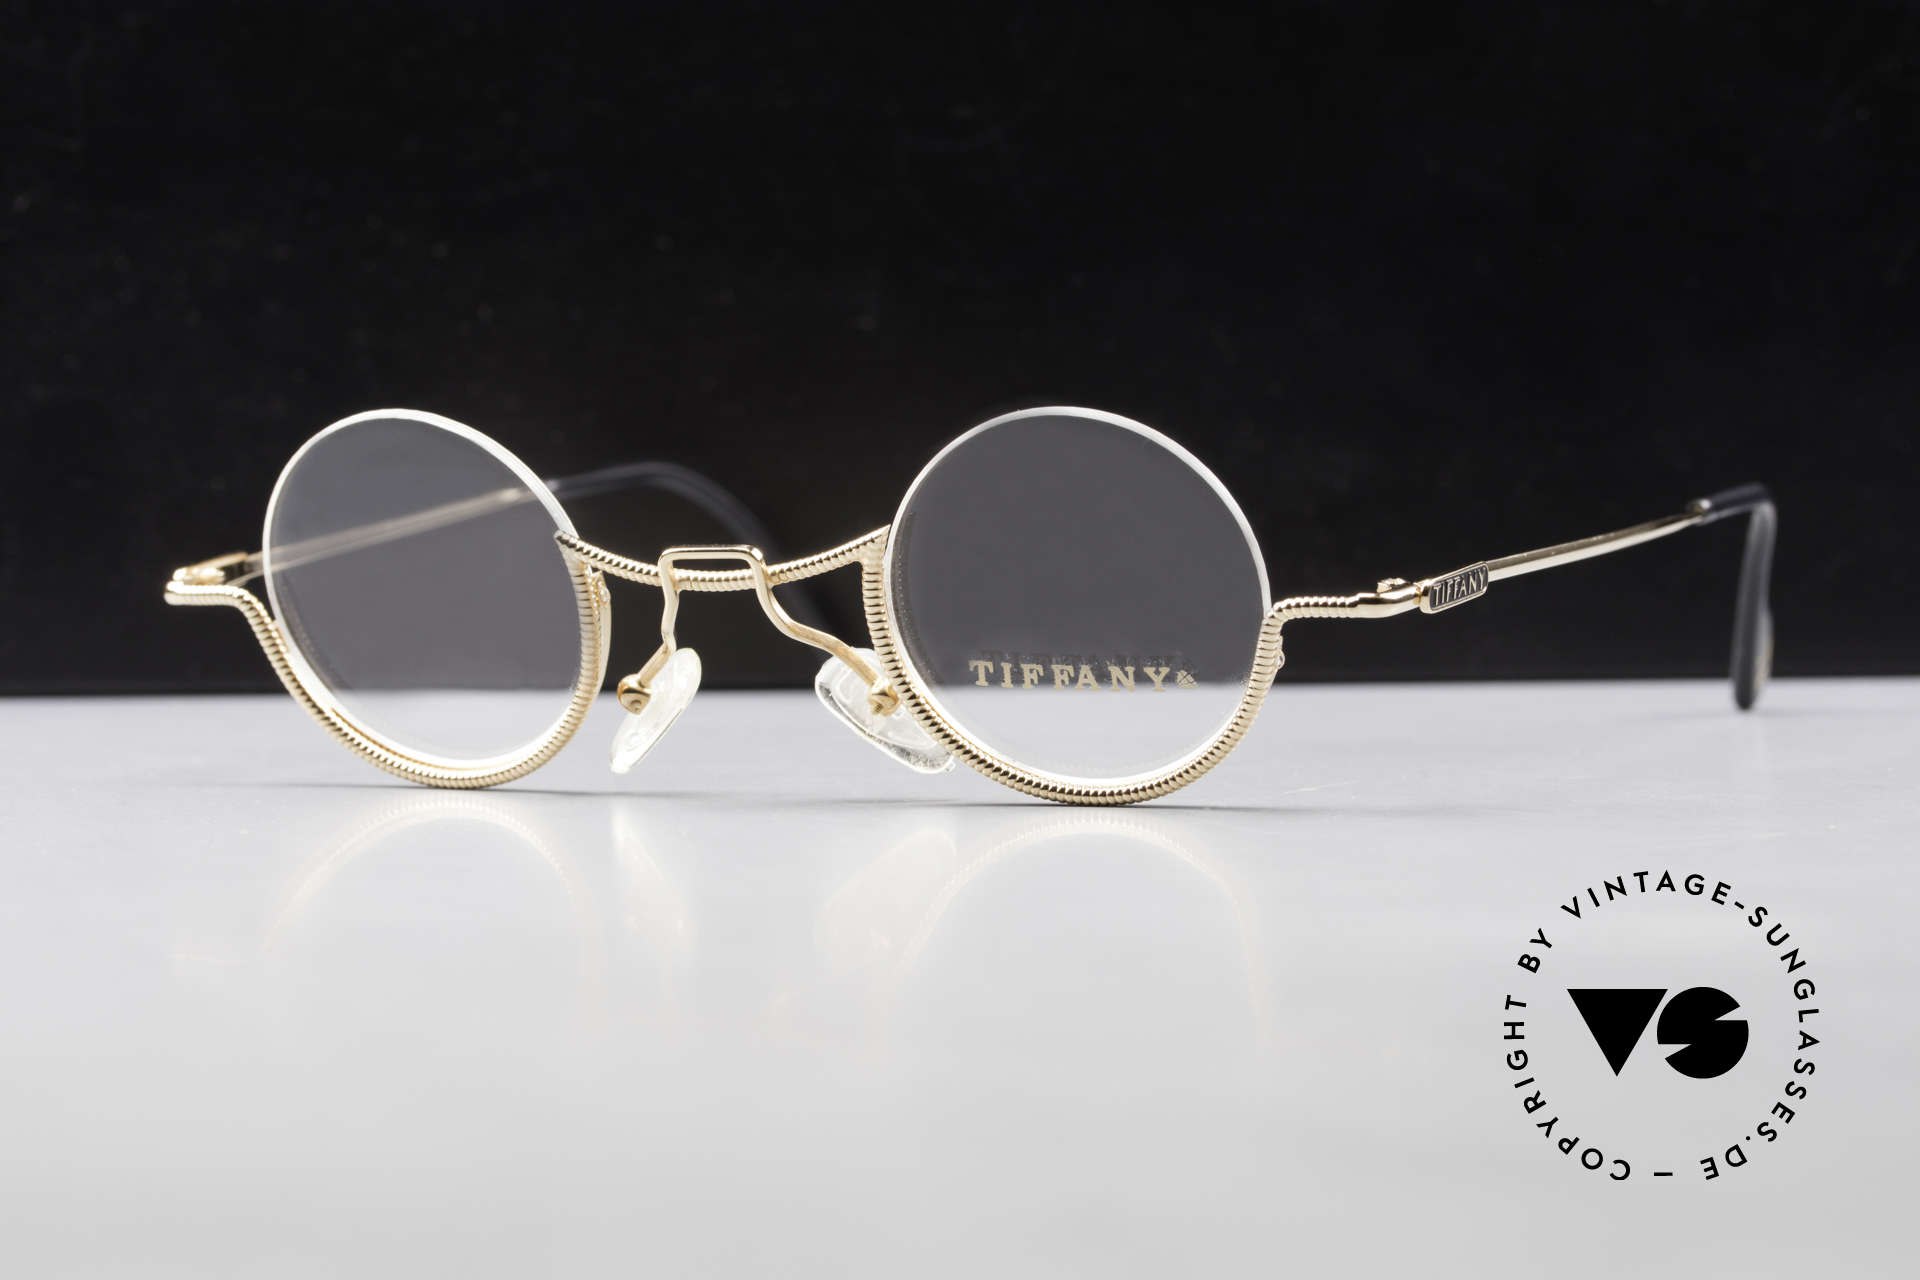 Tiffany T64 23K Gold Plated Luxury Frame, amazing Tiffany ladies glasses (23K Gold Plated), Made for Women